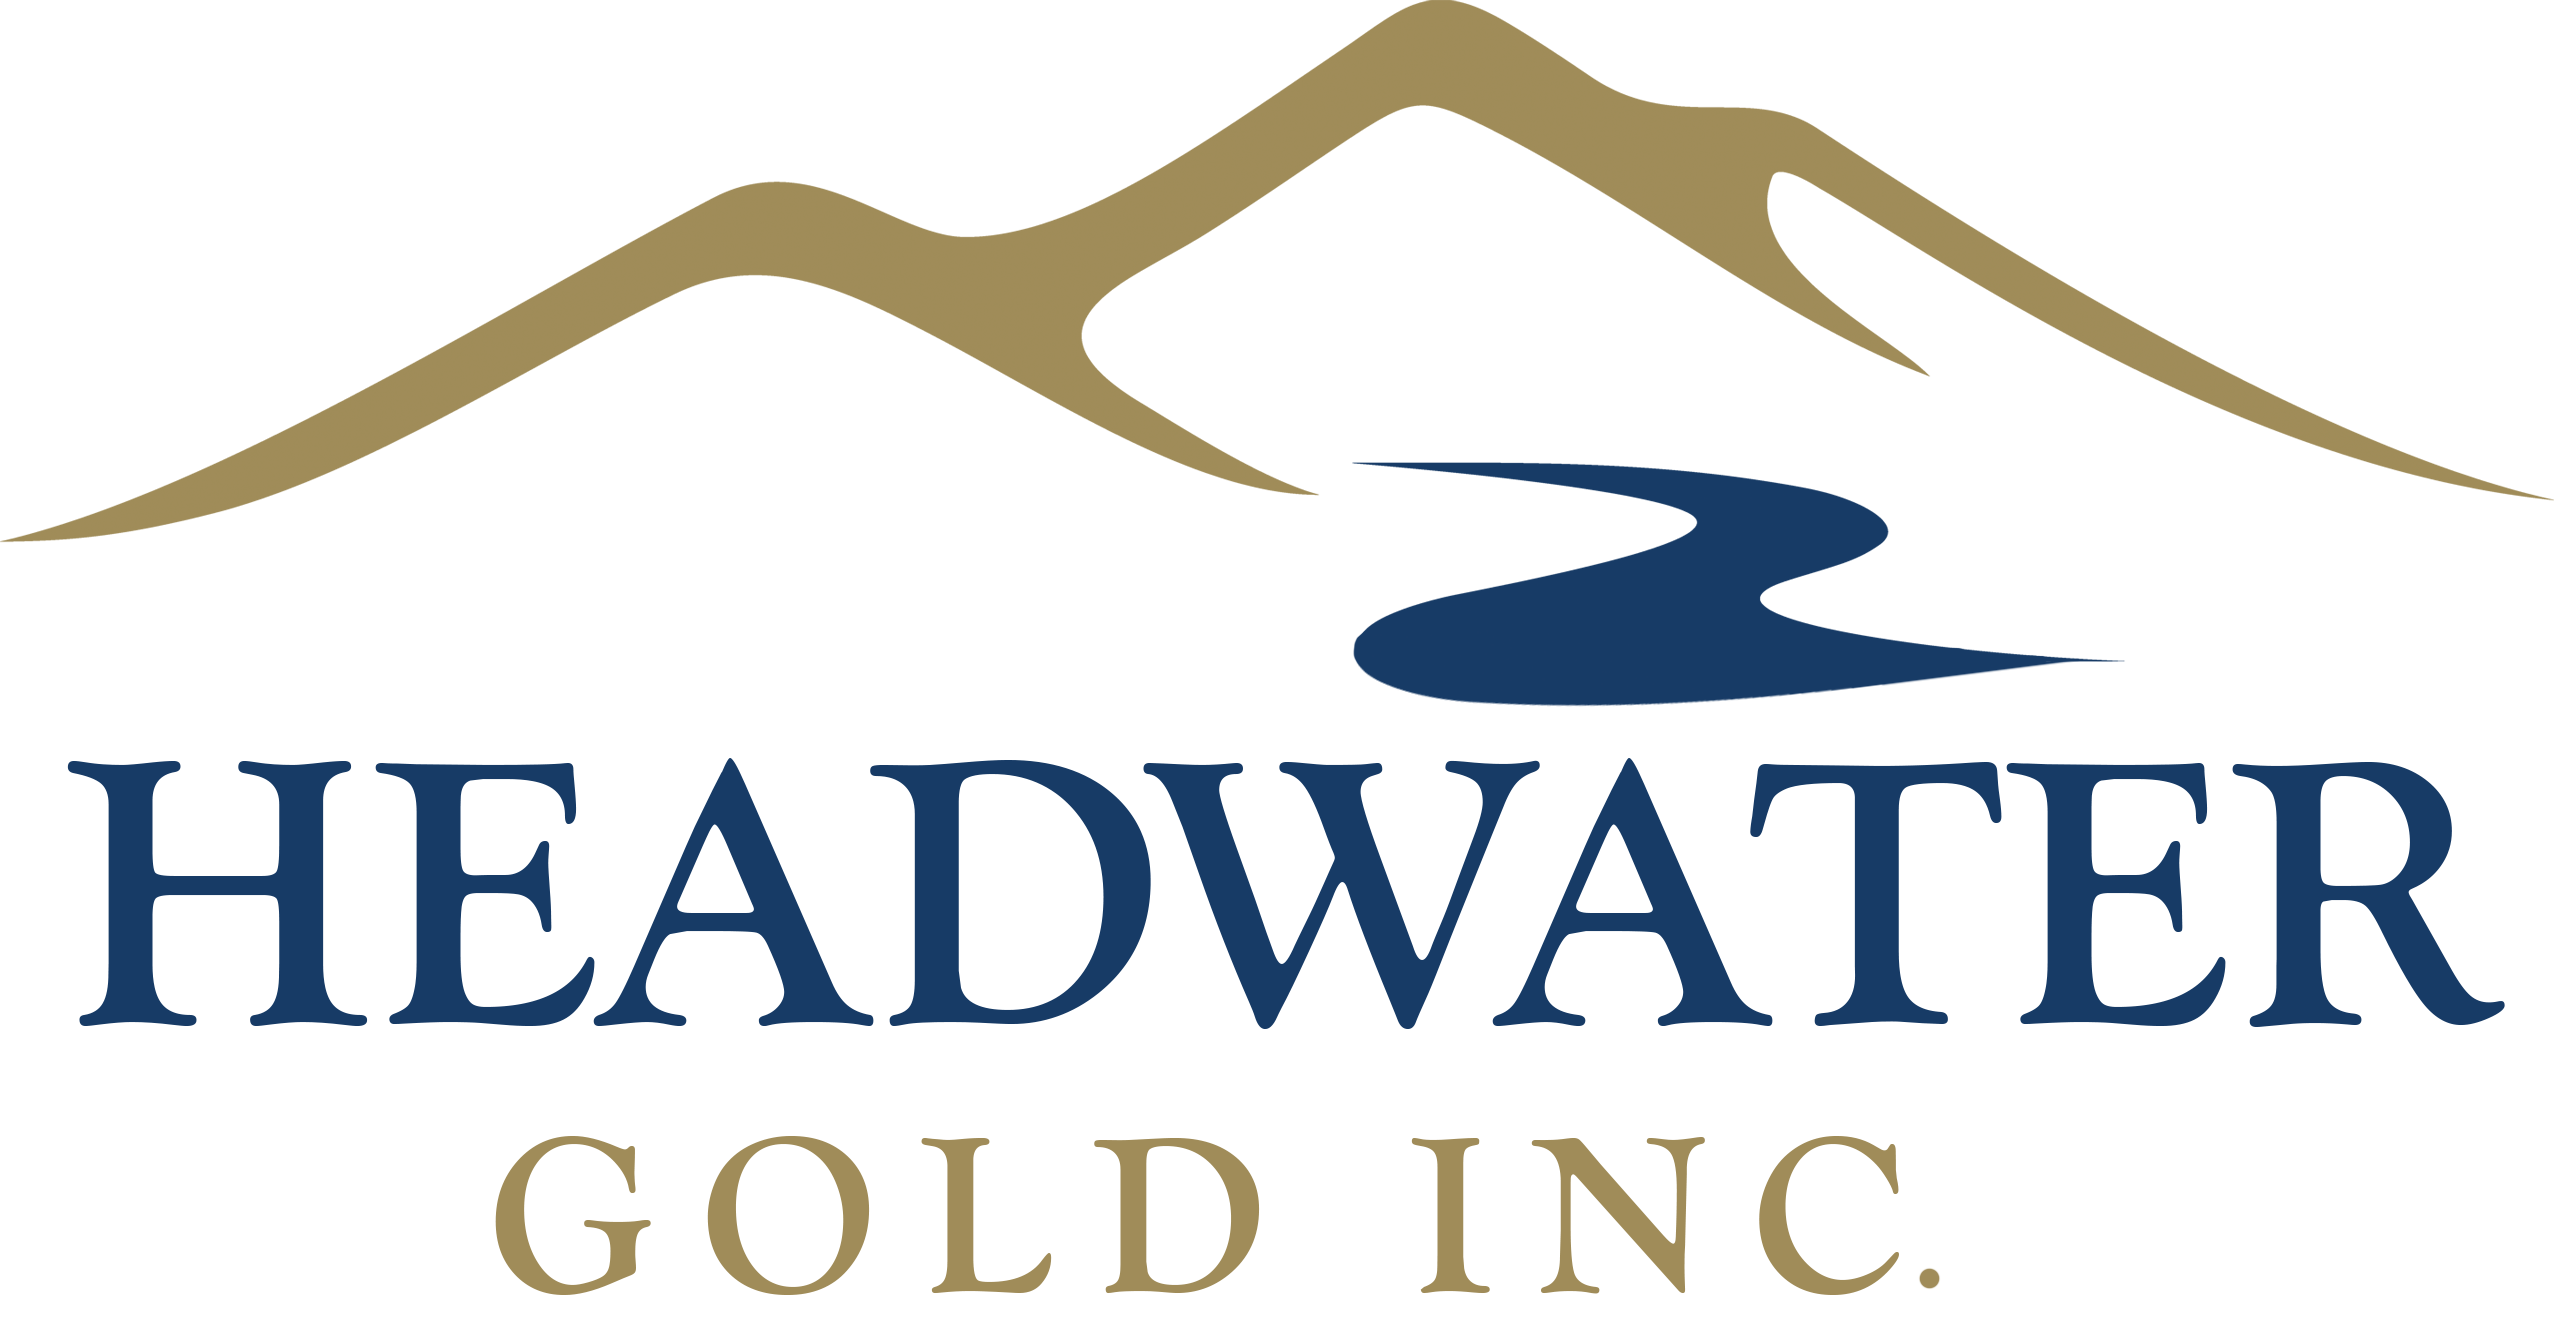 Headwater Gold Inc.